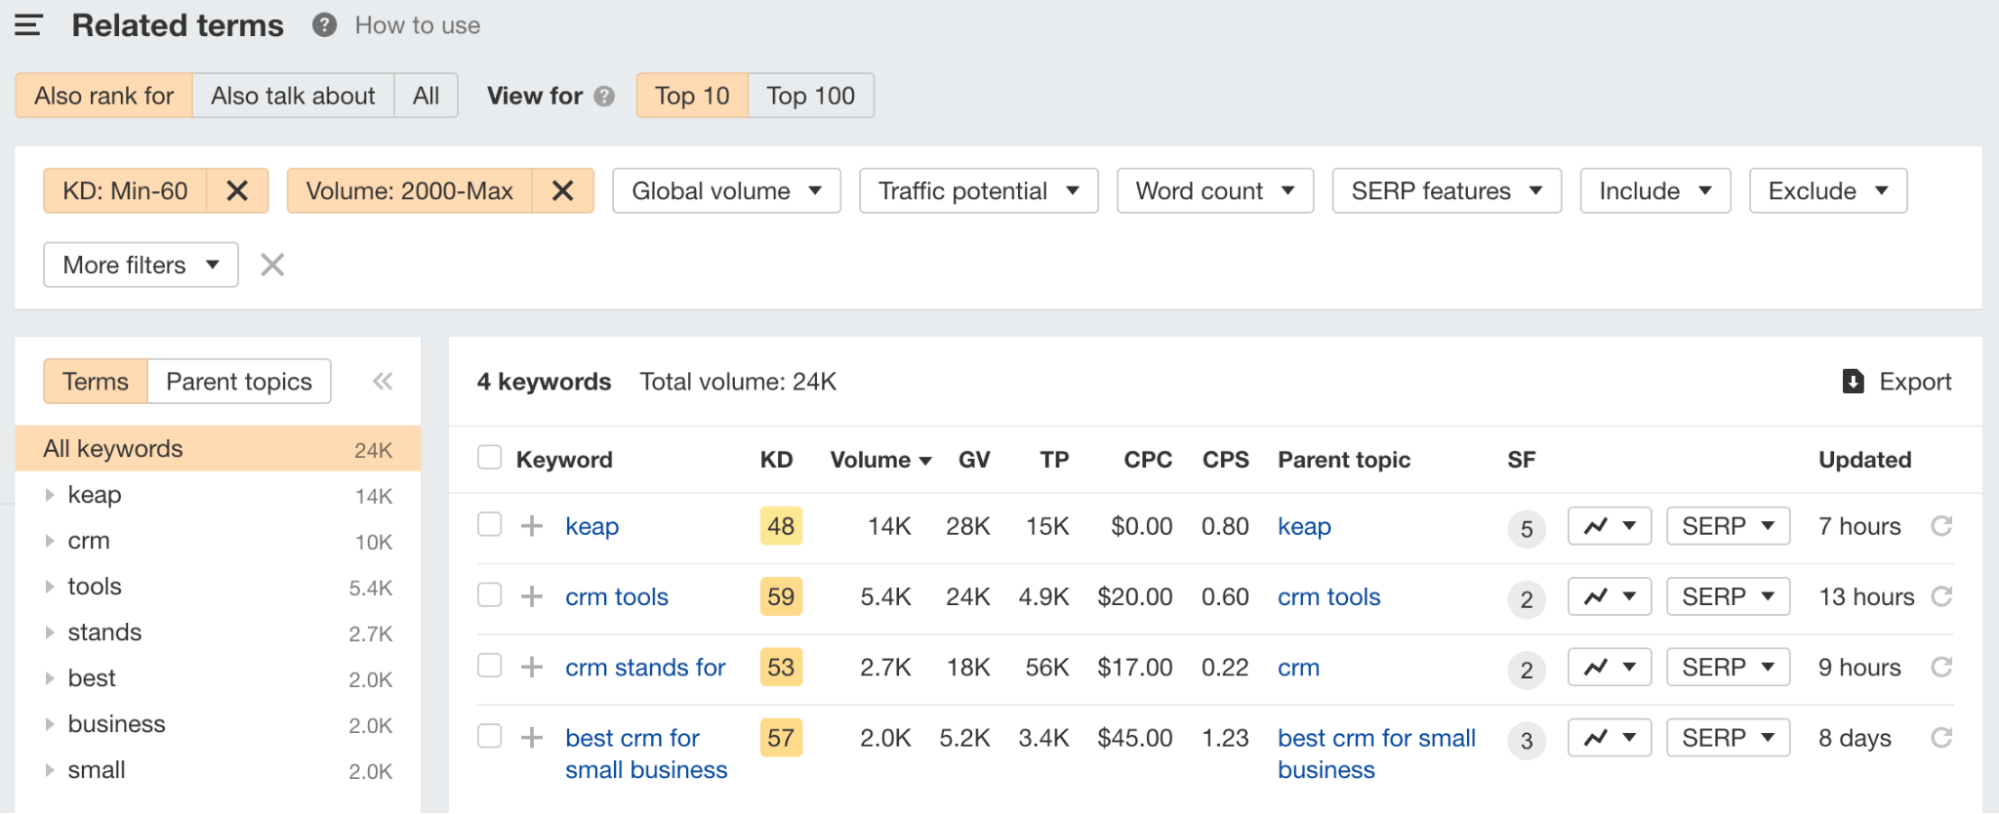 Other topic ideas via the Related terms report in Ahrefs' Keywords Explorer